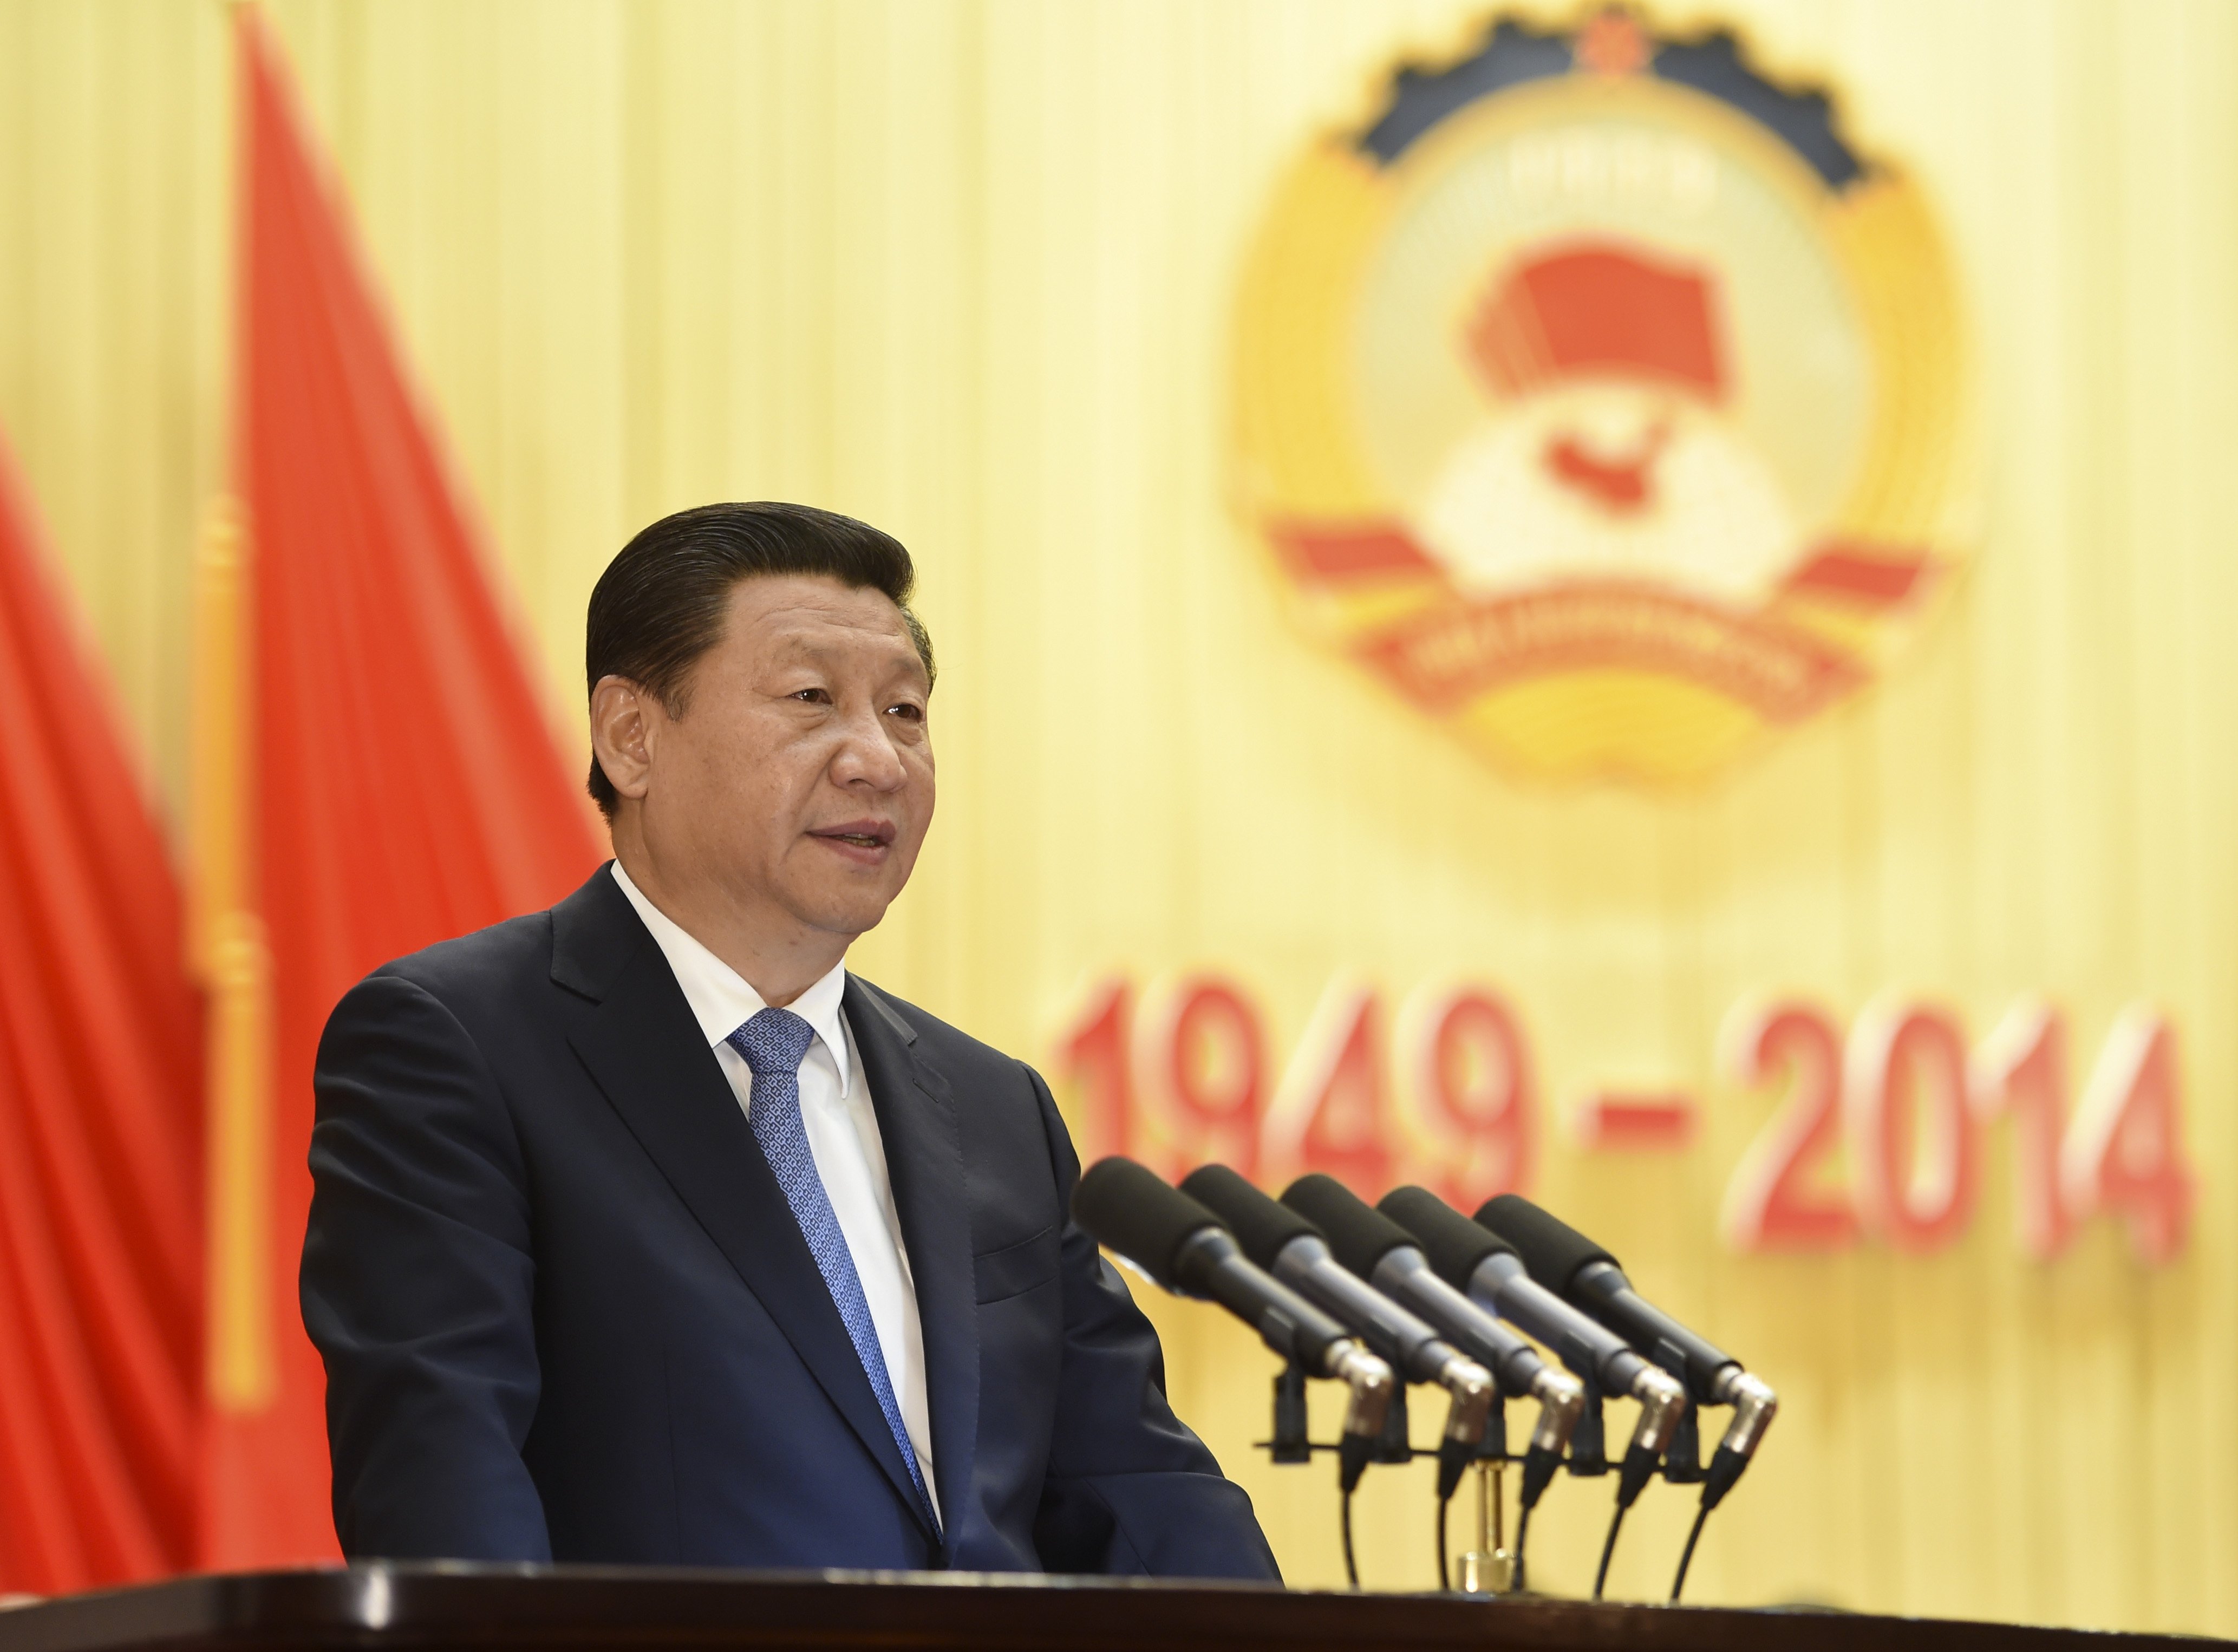 Xi Jinping is taking responsibility for making his ways of thinking clear, unambiguous and open to all. Photo: Xinhua